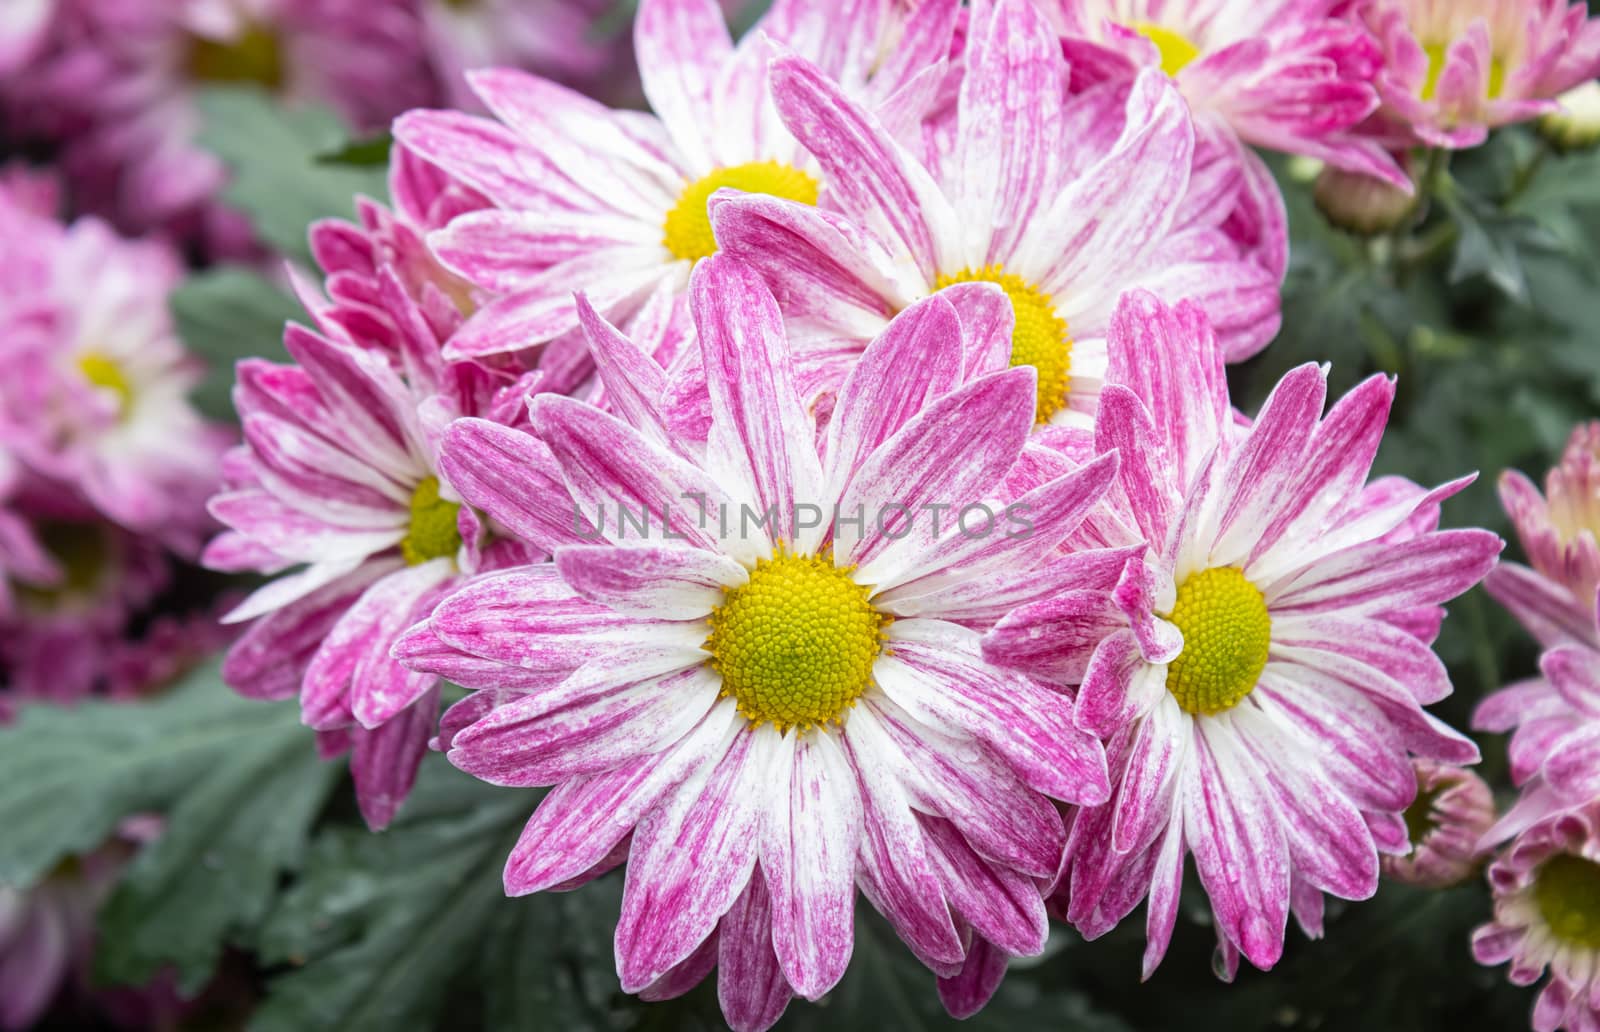 Purple Chrysanthemum Flower and Green Leaves in Garden in Zoom V by steafpong